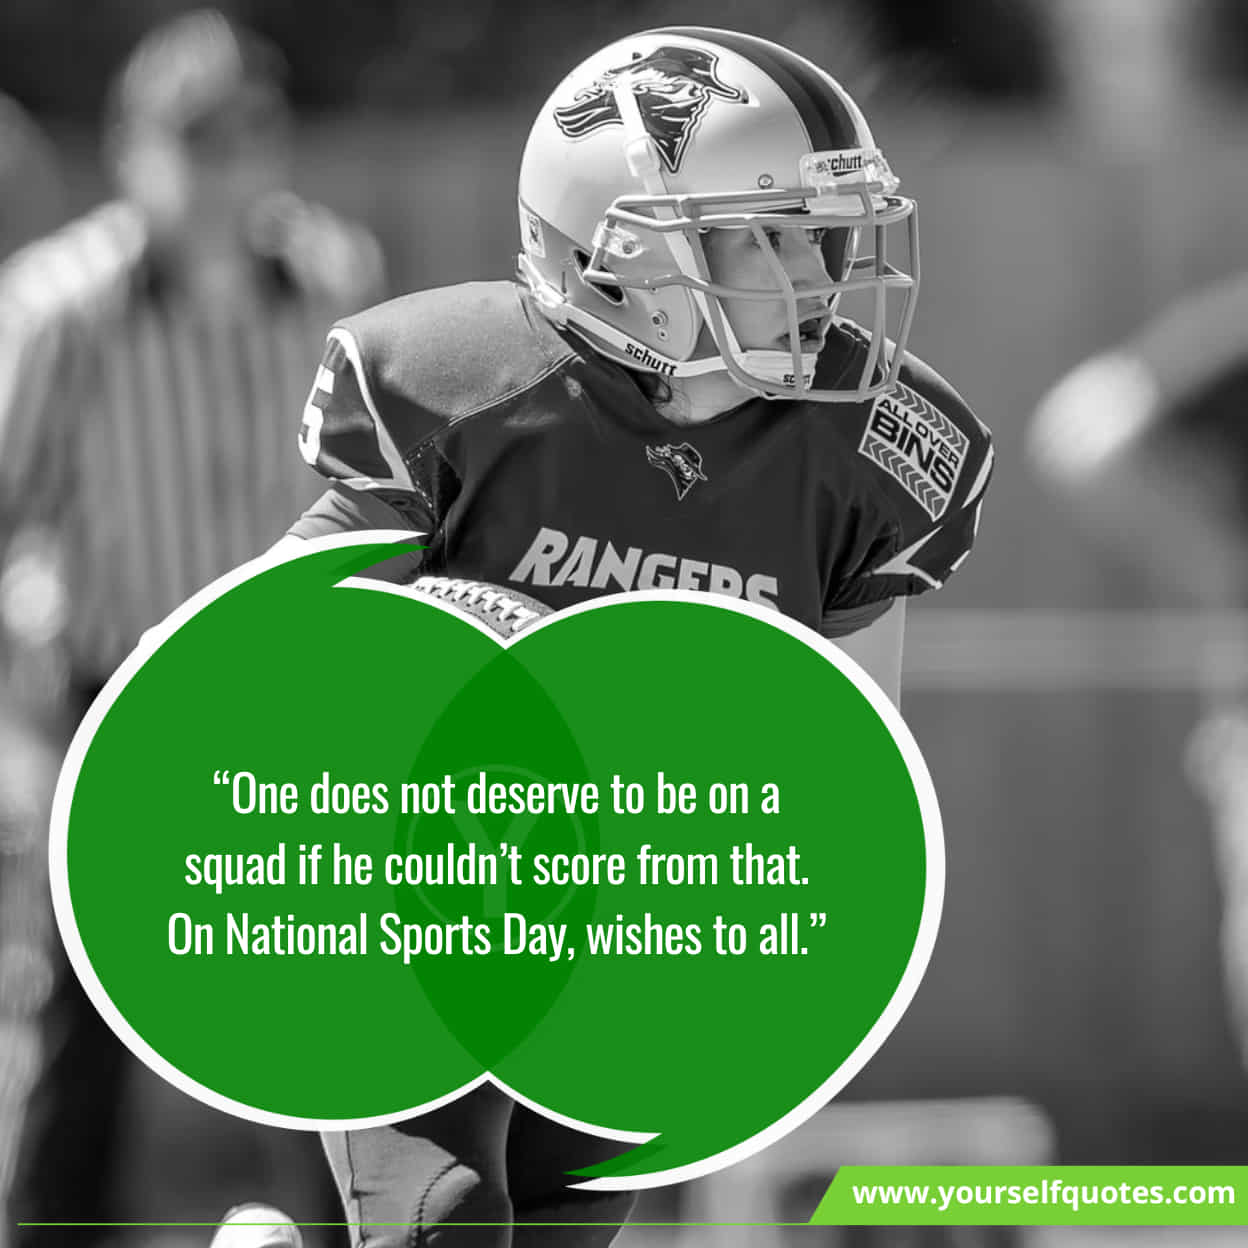 Latest National Sports Day Quotes